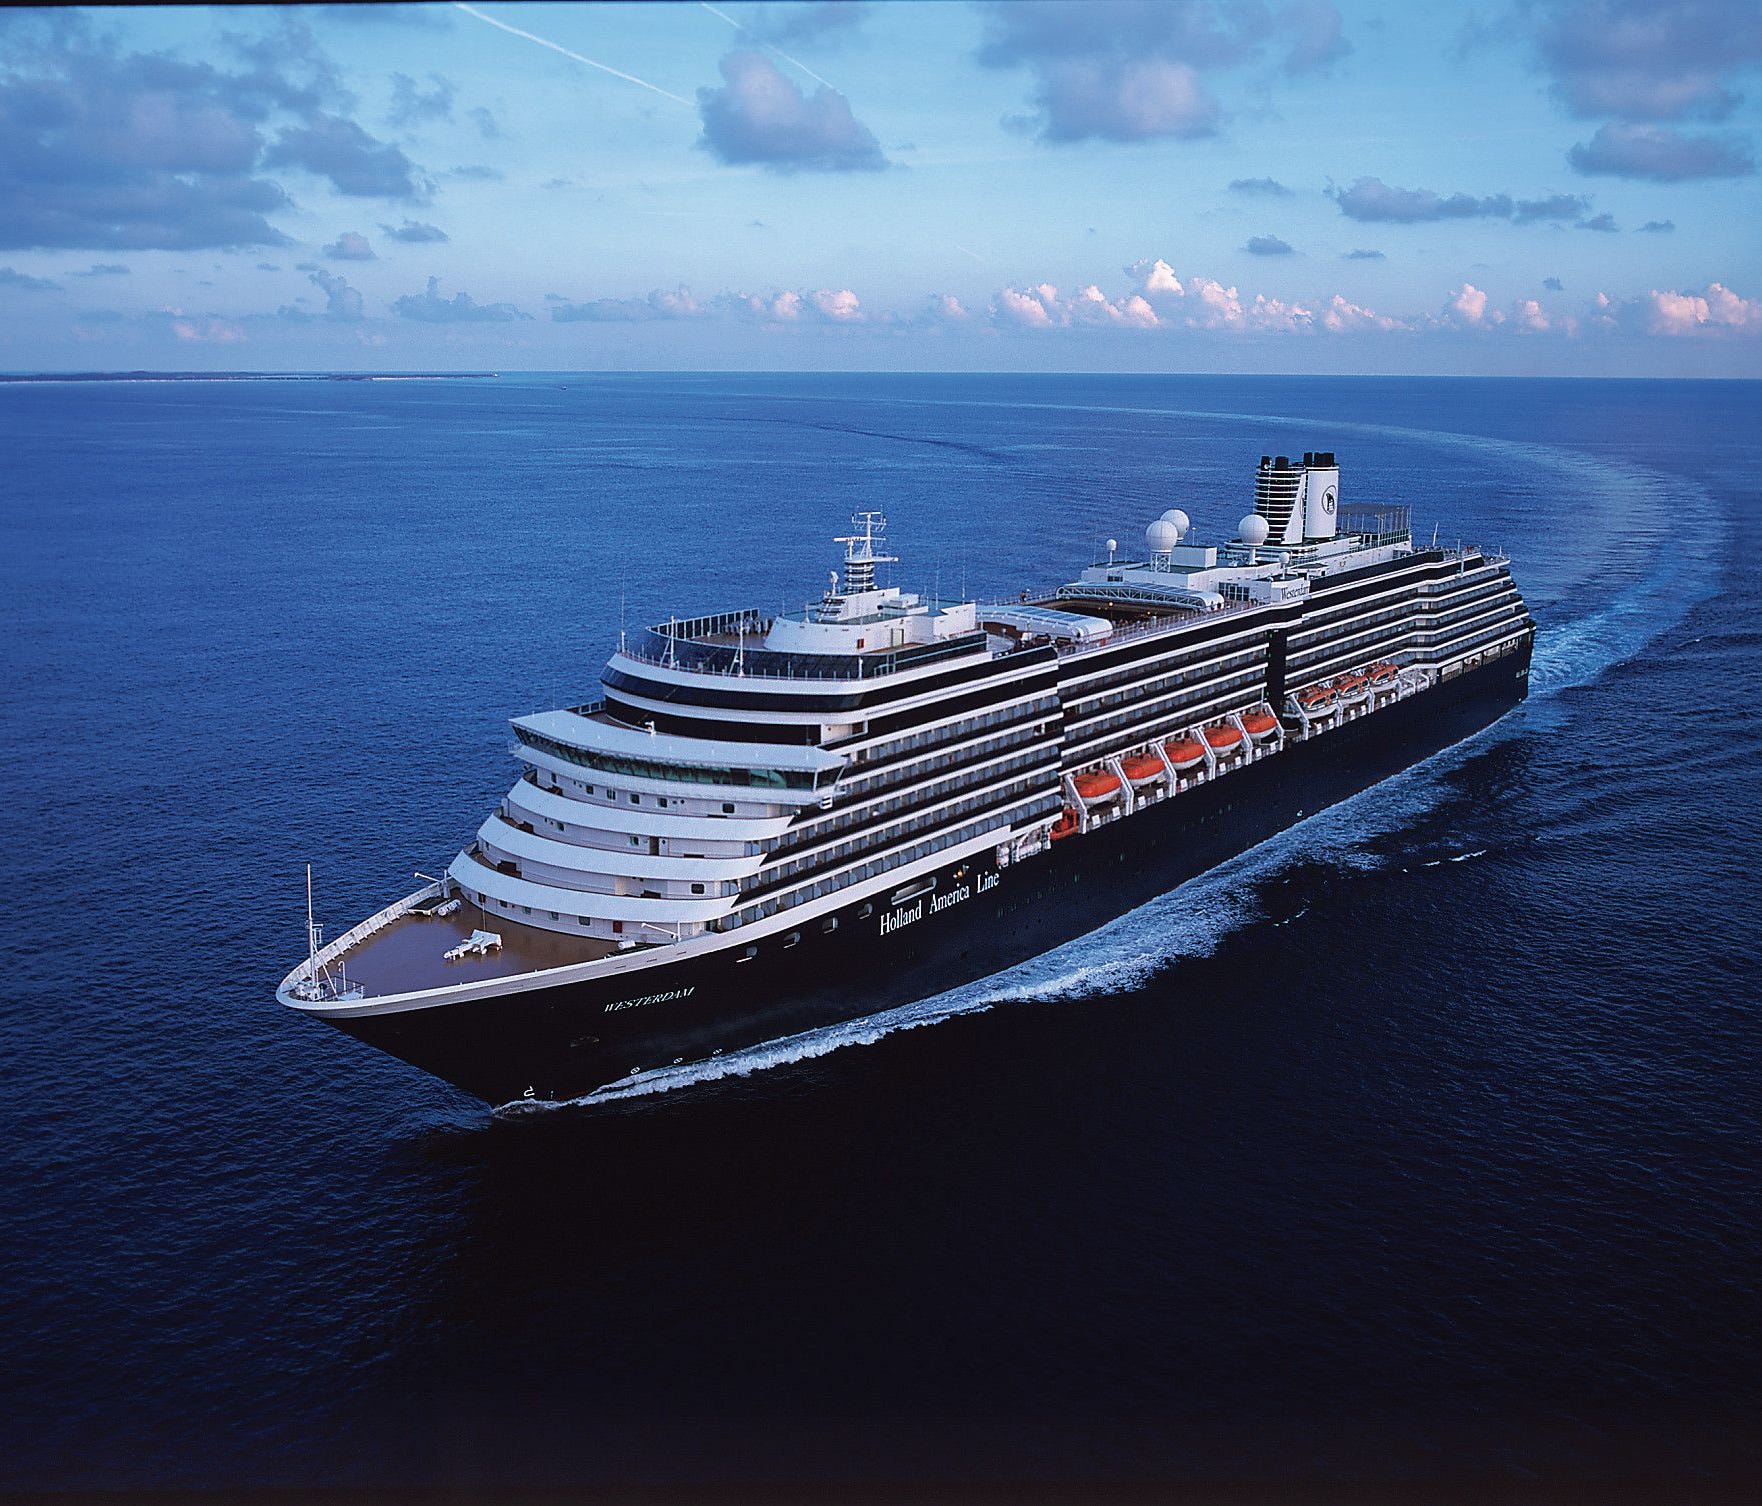 The 1,916-passenger Westerdam is one of Holland America's bigger vessels.